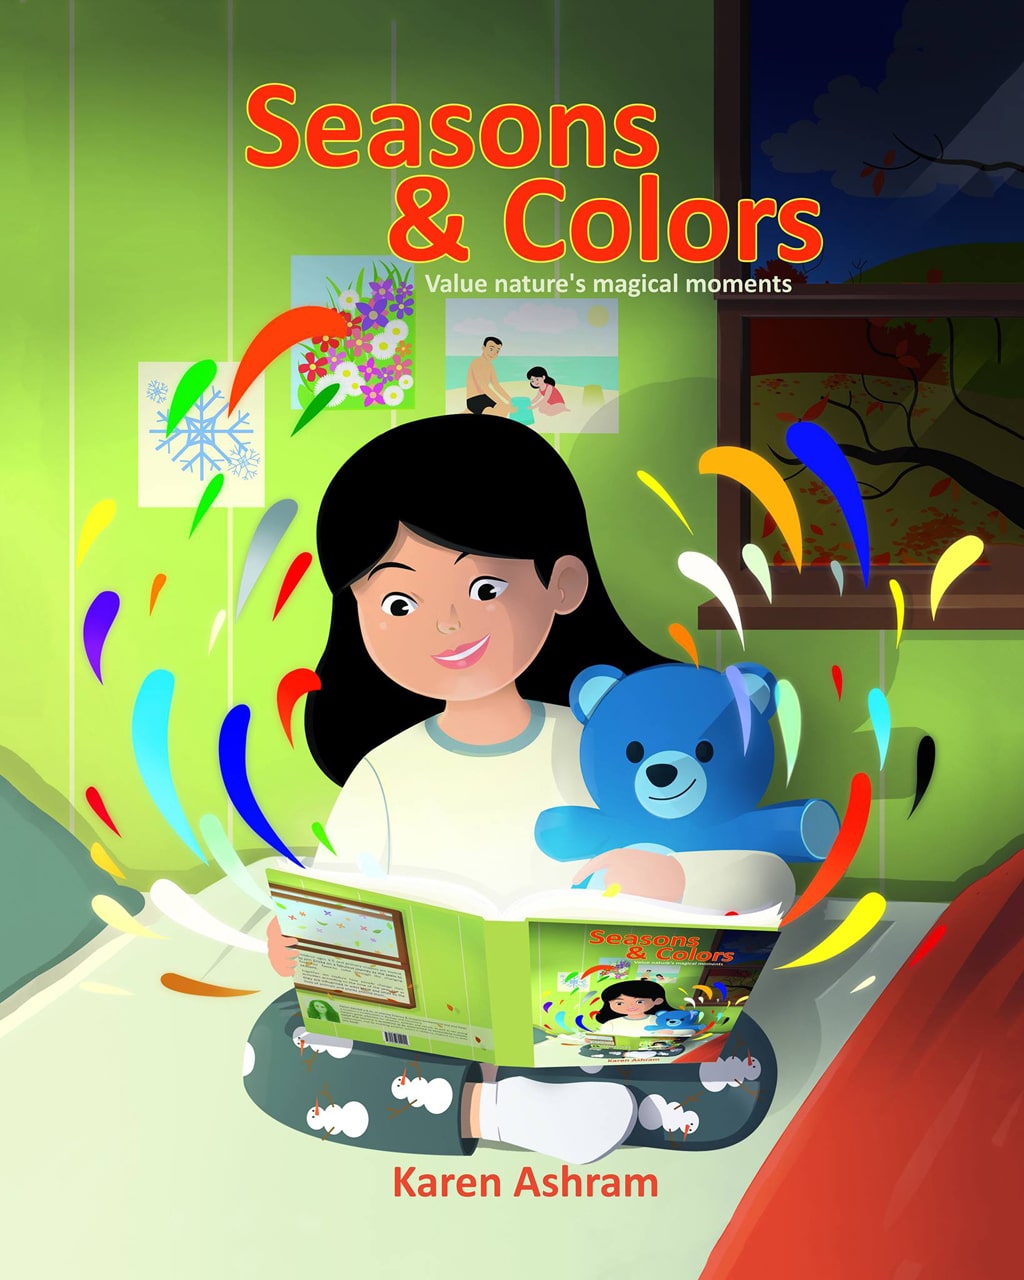 Seasons and Colors, Seasons and Colors English Edition, Seasons and Colors by Karen Ashram, best books for kindergarten, best picture book for childrens